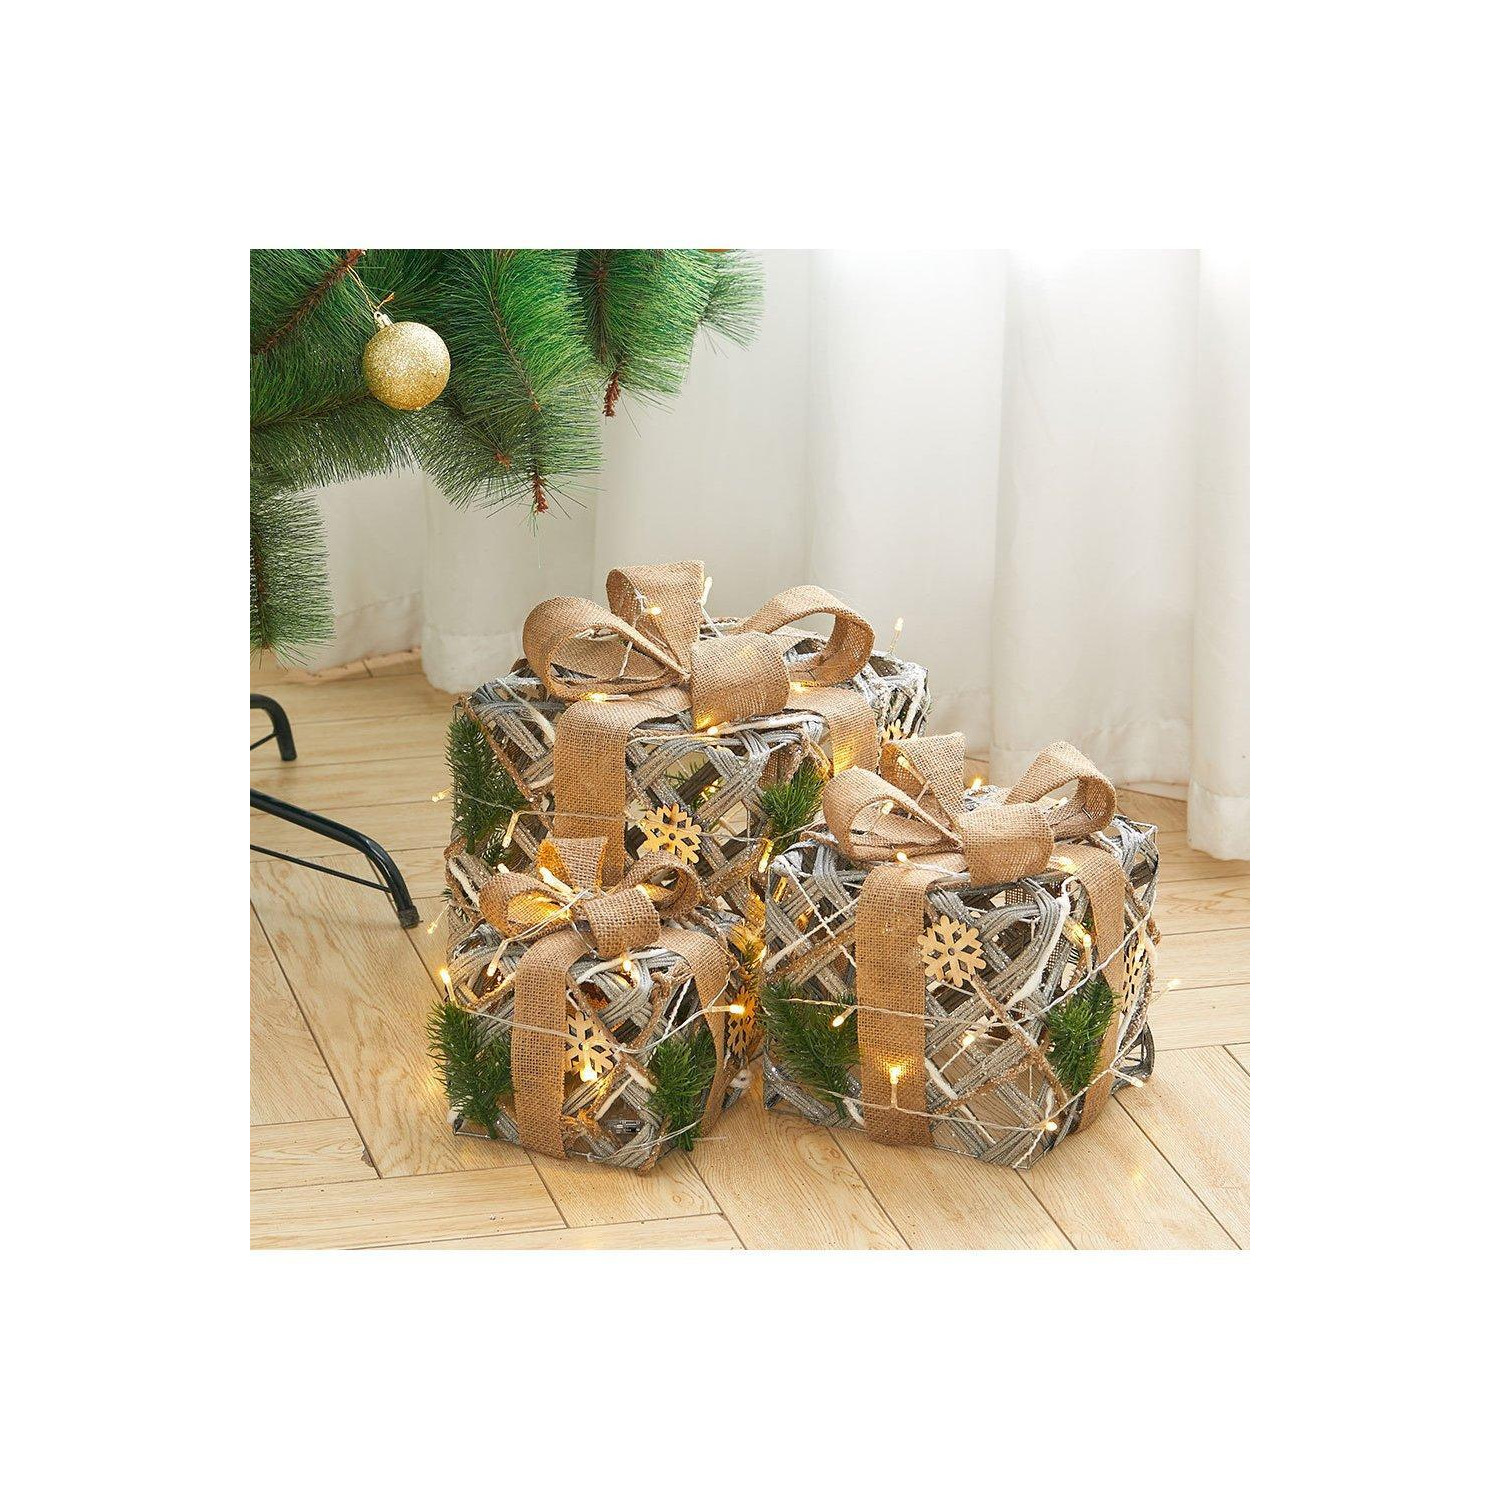 3 Pcs Christmas Decorative Gift Cube Box with Pine Bowknot Home Decor - image 1